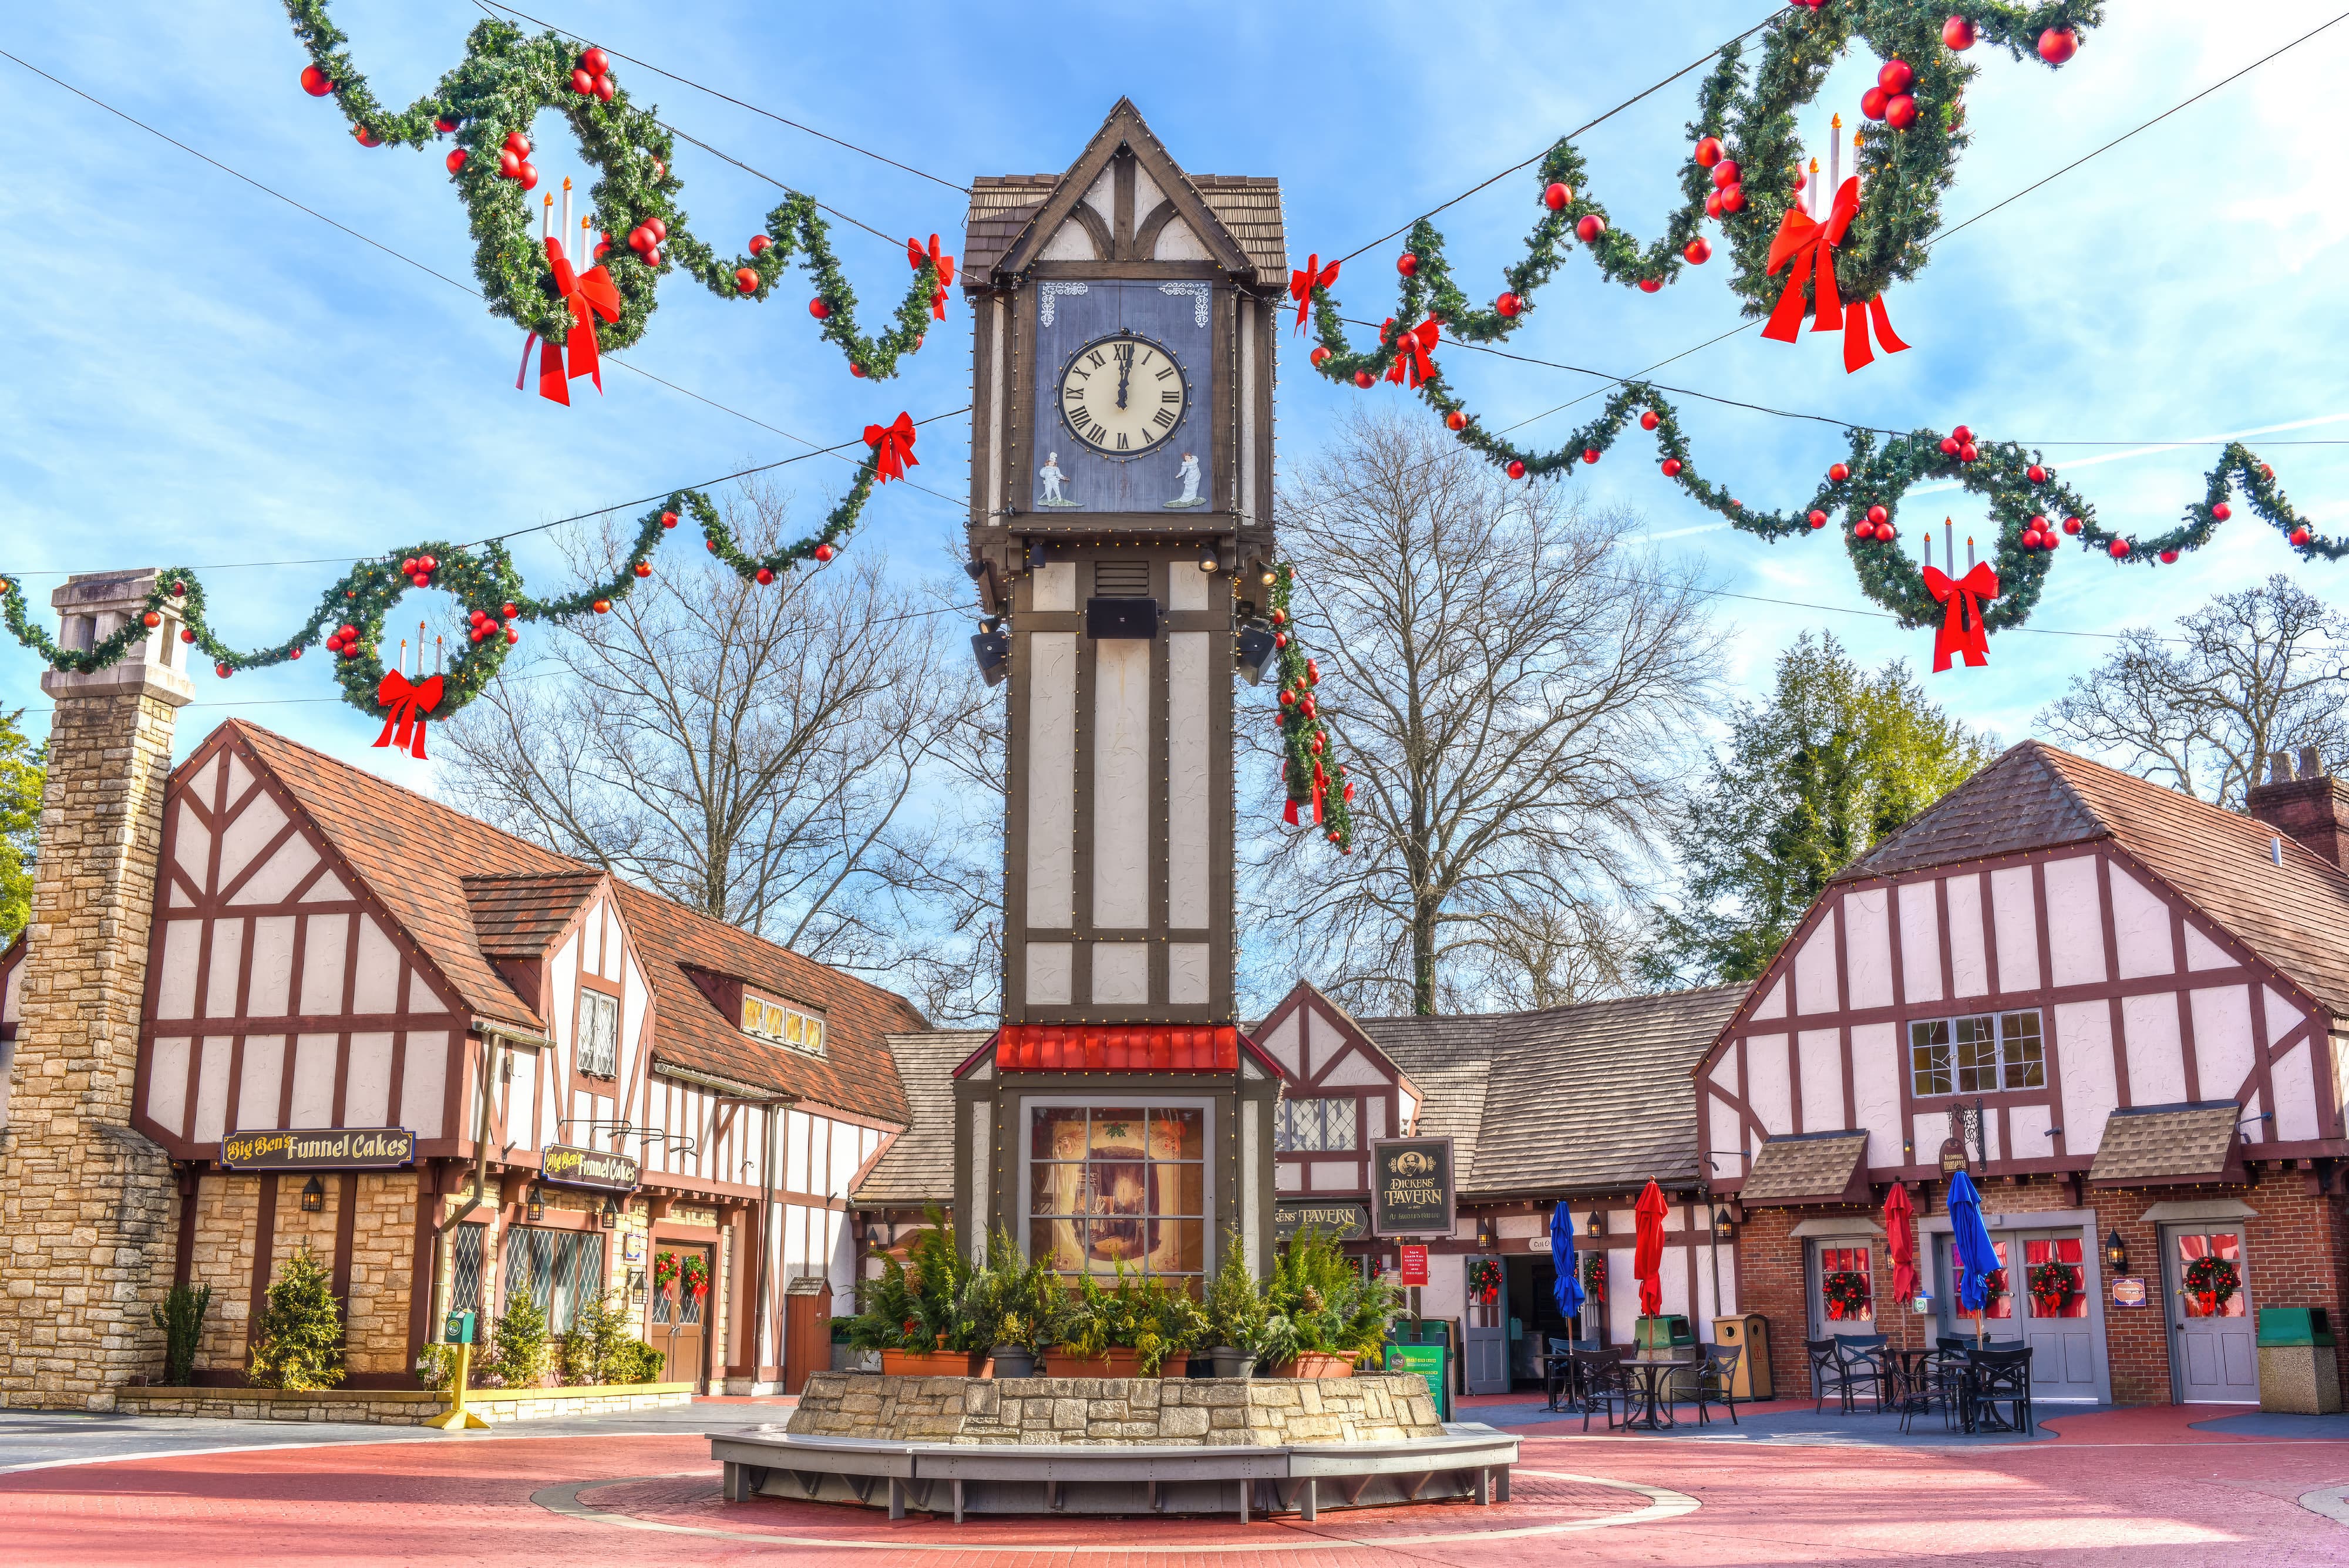 The main entrance and clock tower of Busch Gardens Williamsburg at the English village